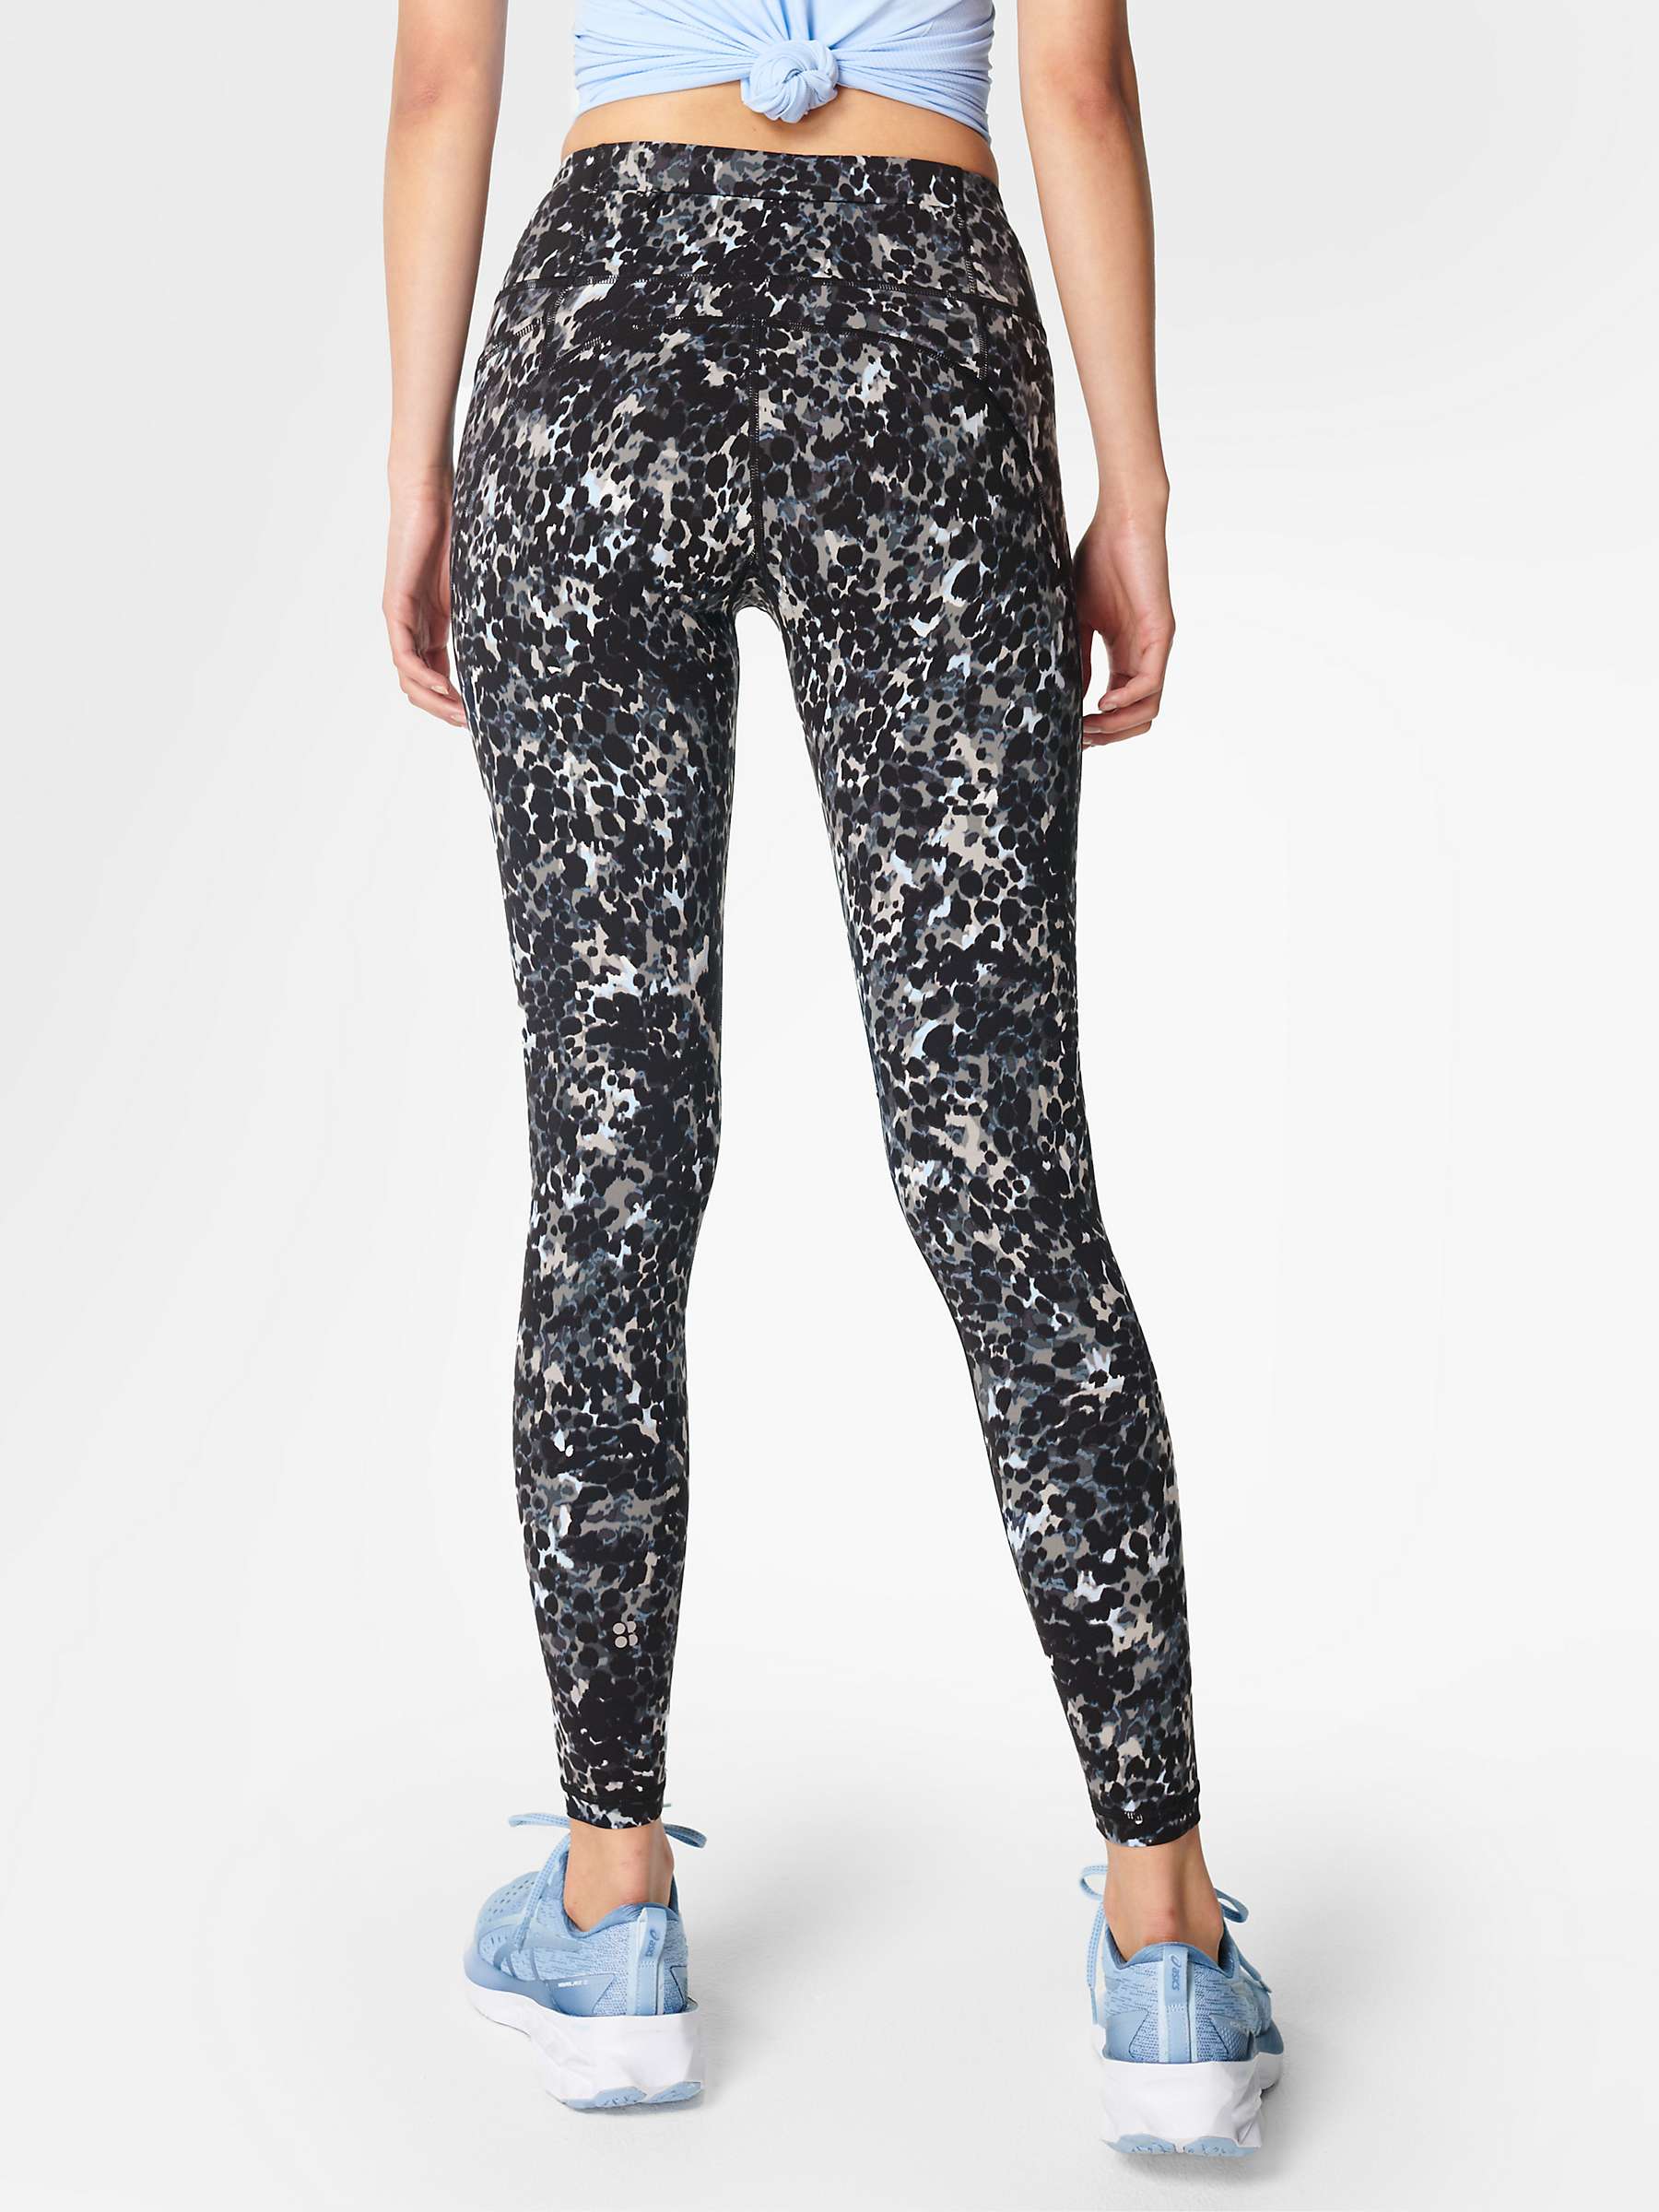 Buy Sweaty Betty Power Gym Full Length Embroidered Leggings Online at johnlewis.com